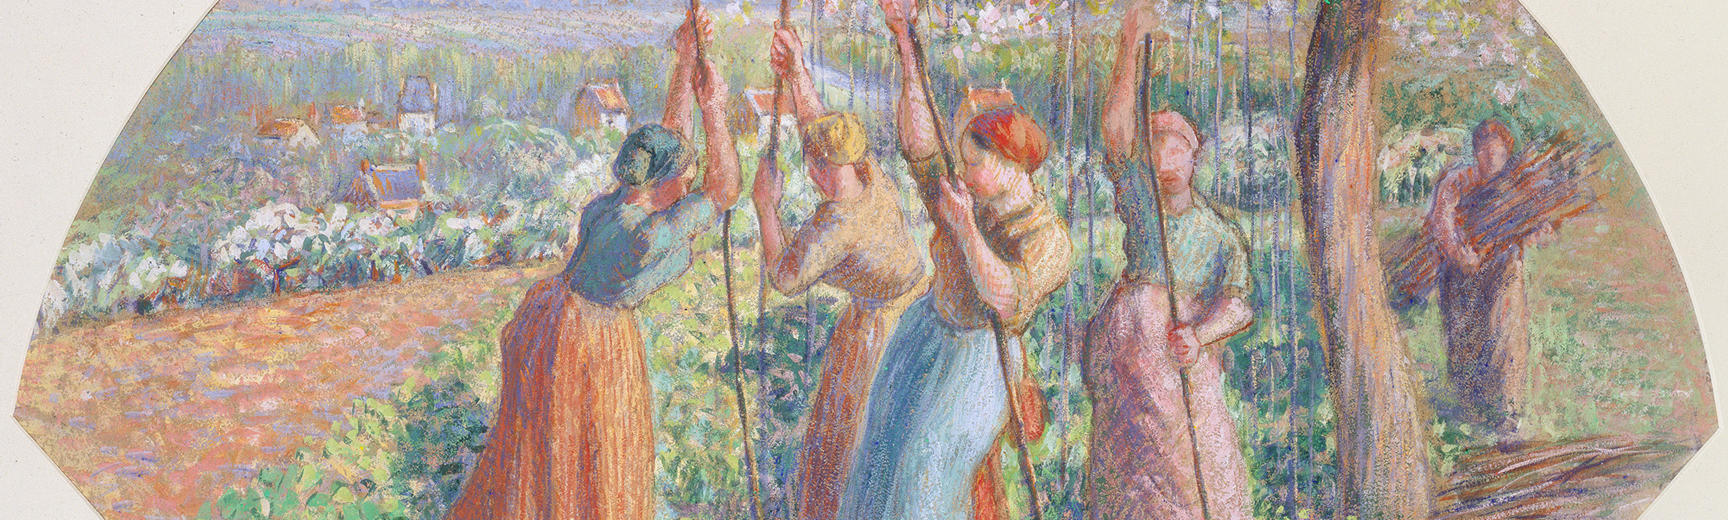 Detail of a painting by Camille Pissarro of women staking peas under a tree